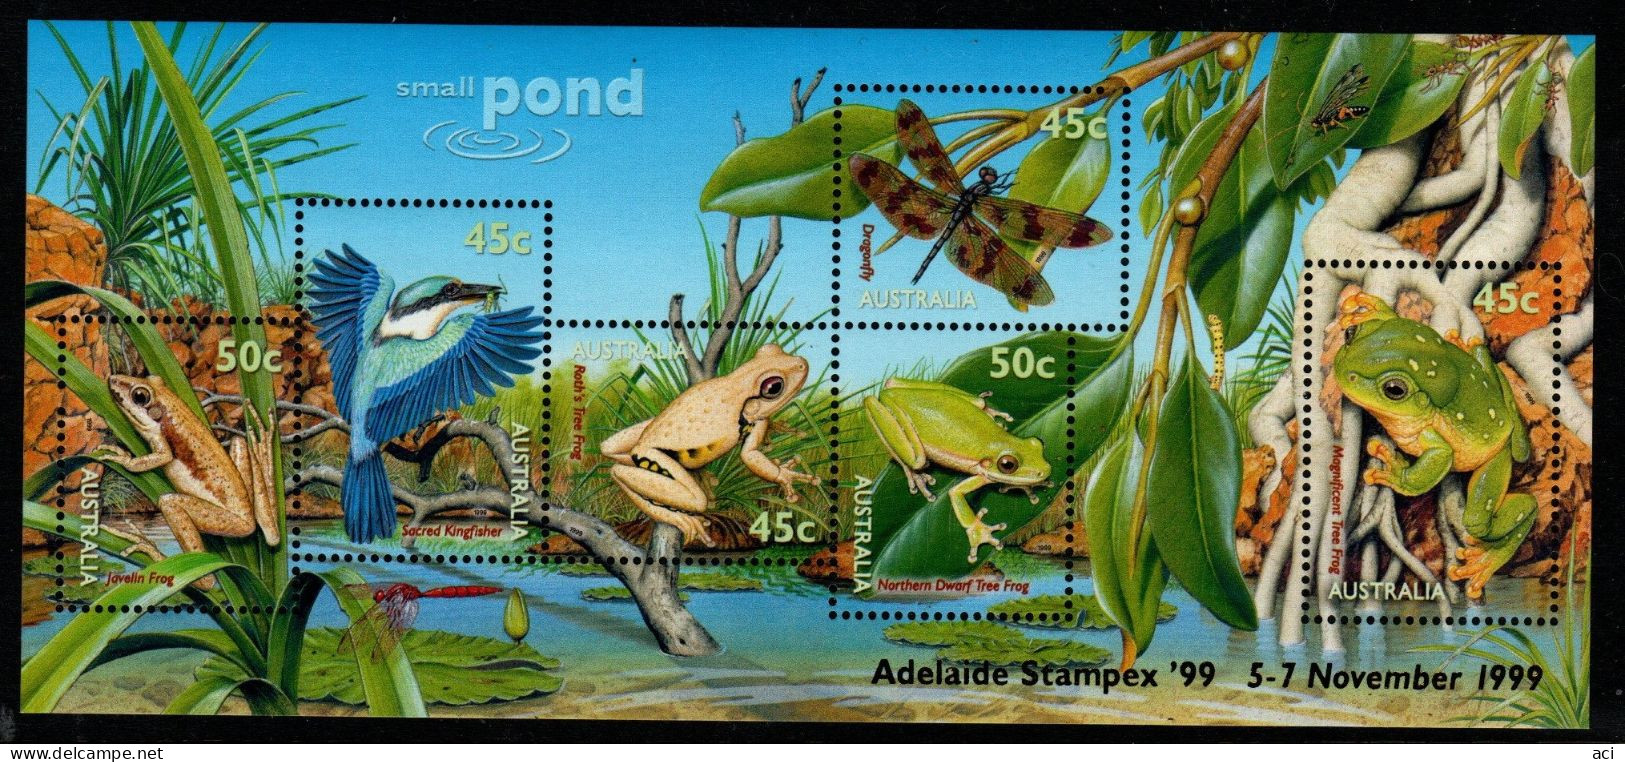 Australia  1999 Small Pond Opt Adelaide Stampex99 In Gold ,souvenir Sheet,,Mint Never Hinged - Nuovi